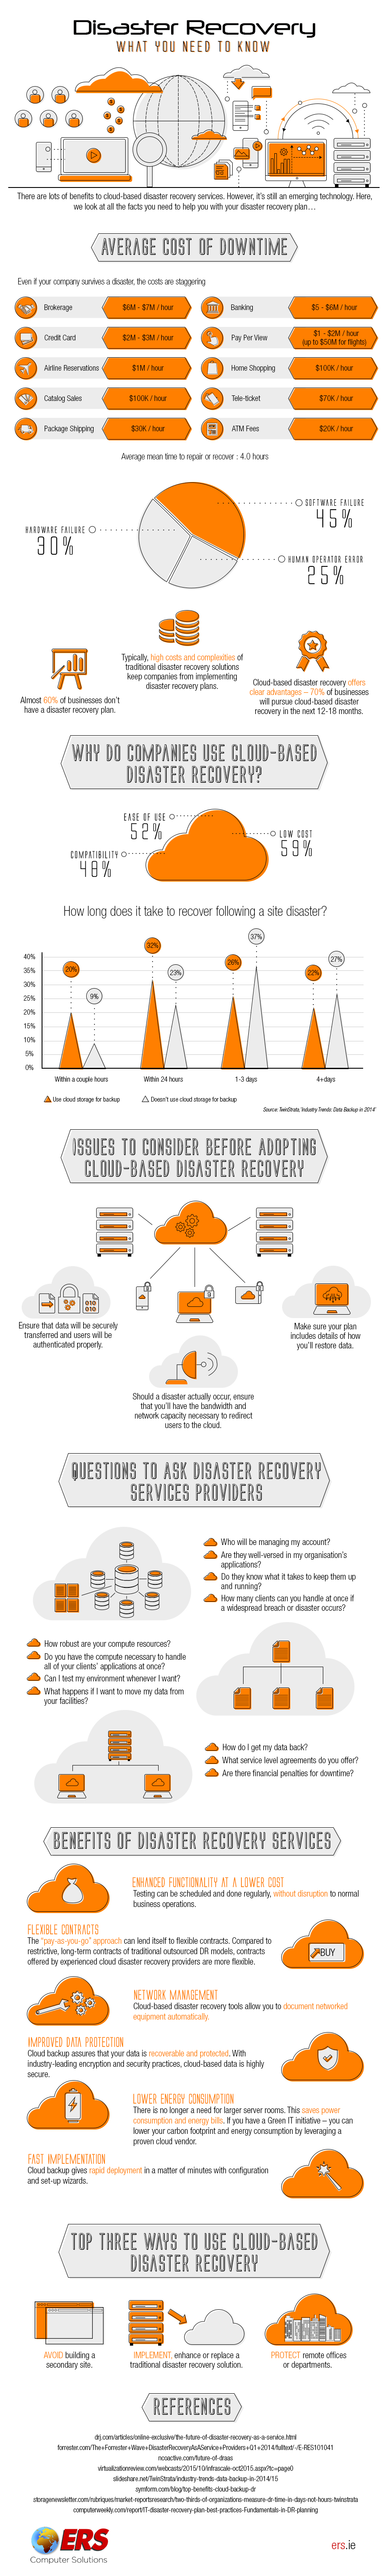 Disaster Recovery- What You Need To Know